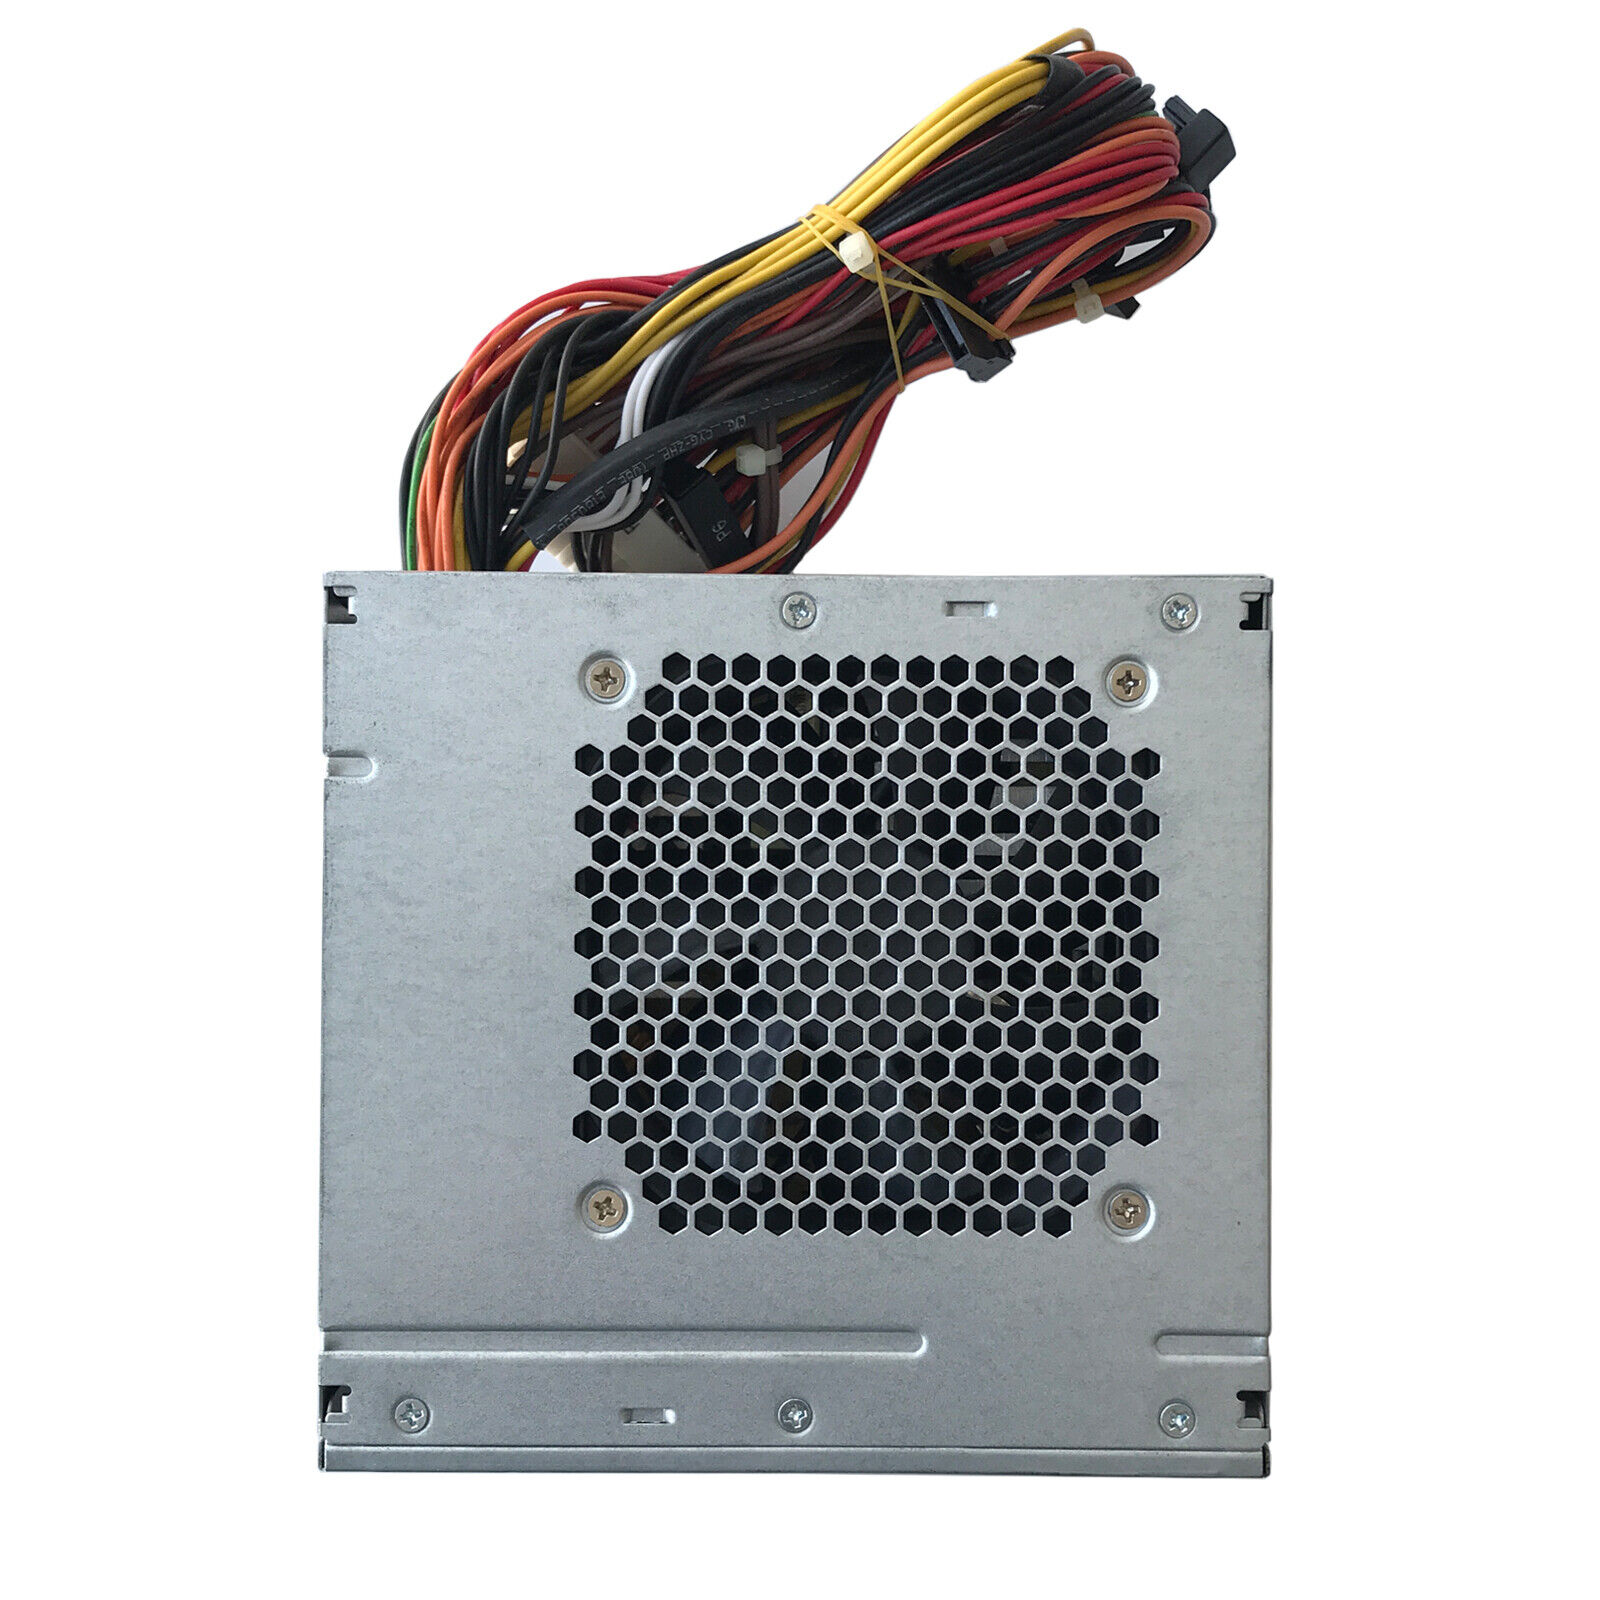 New For Dell XPS 8910 8920 8300 8500 8700 8900 8930 R5 460W PSU Power Supply US